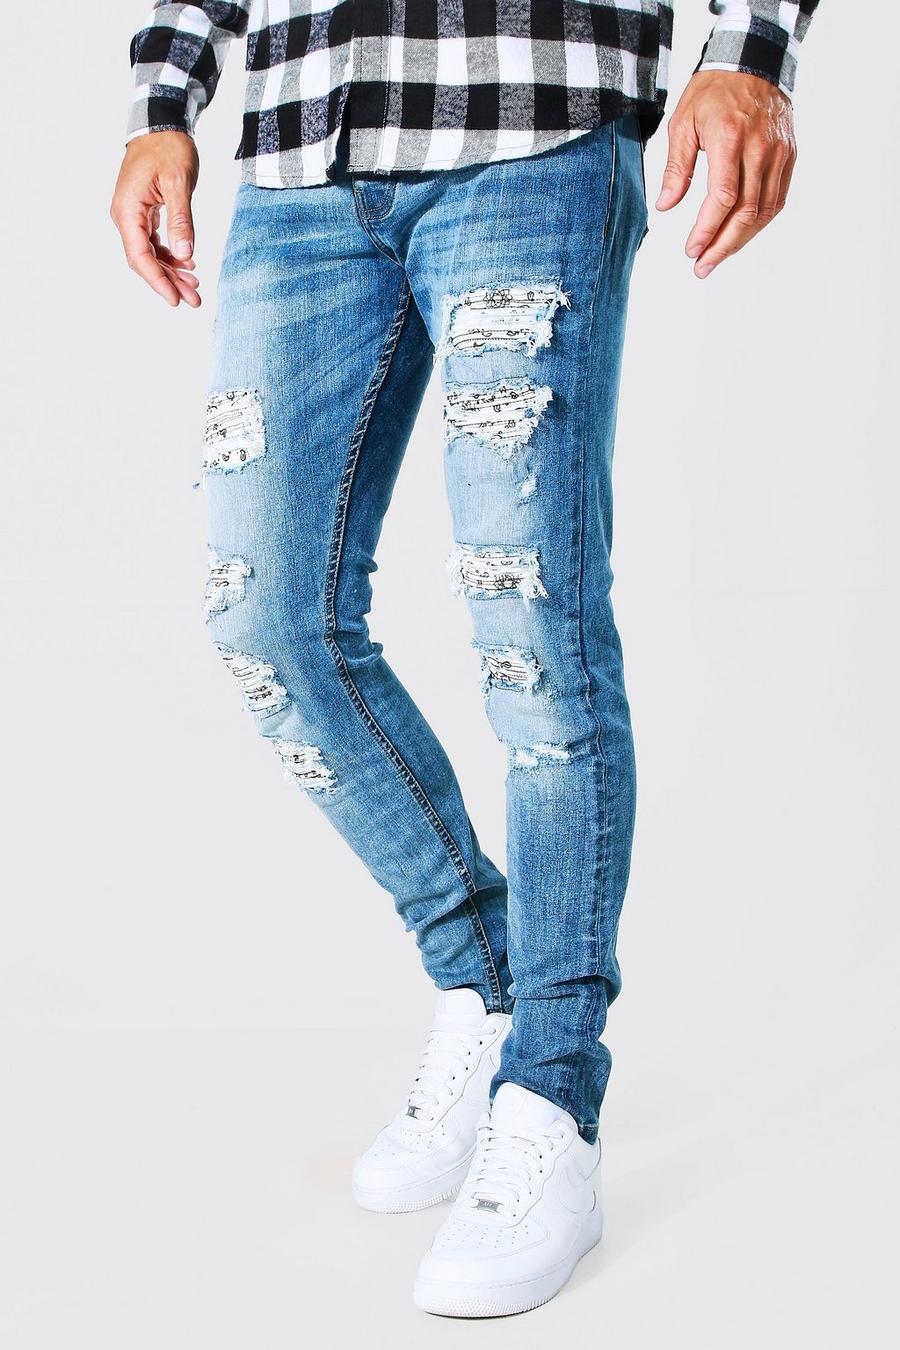 Jeans Tall Skinny Fit stile Biker con strappi & rattoppi all over, Light blue azul image number 1